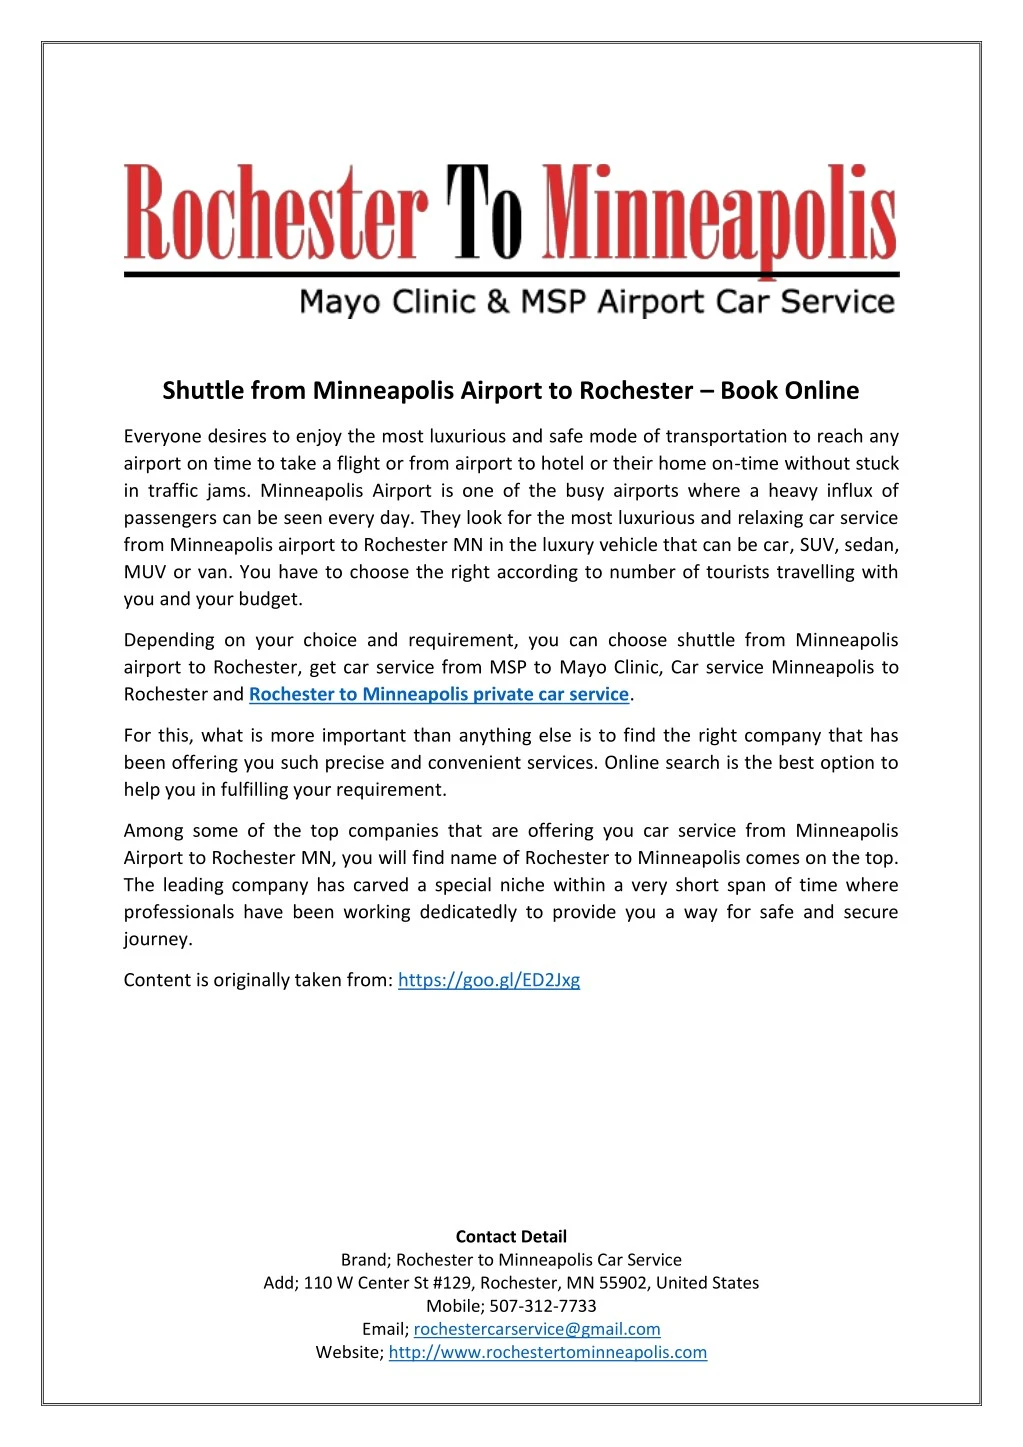 shuttle from minneapolis airport to rochester